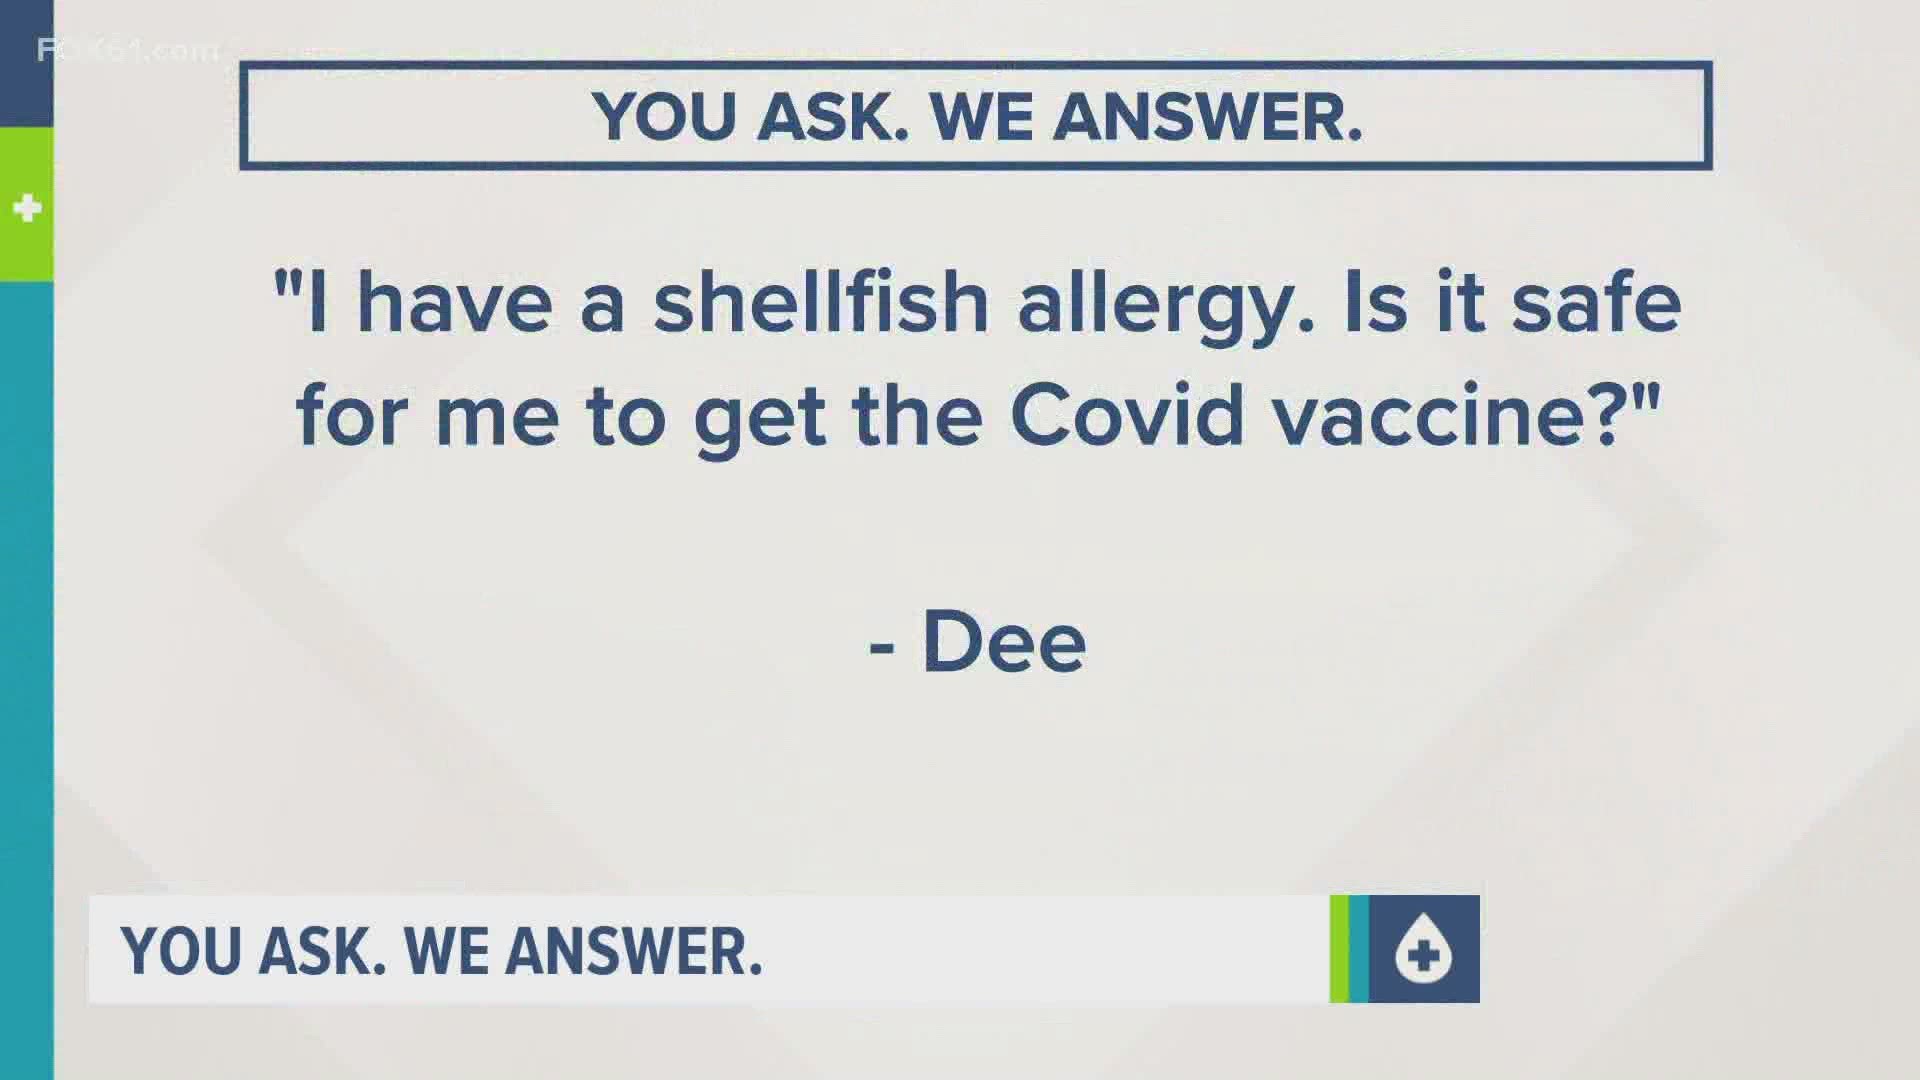 "I have a shellfish allergy. Is it safe for me to get the COVID vaccine?"